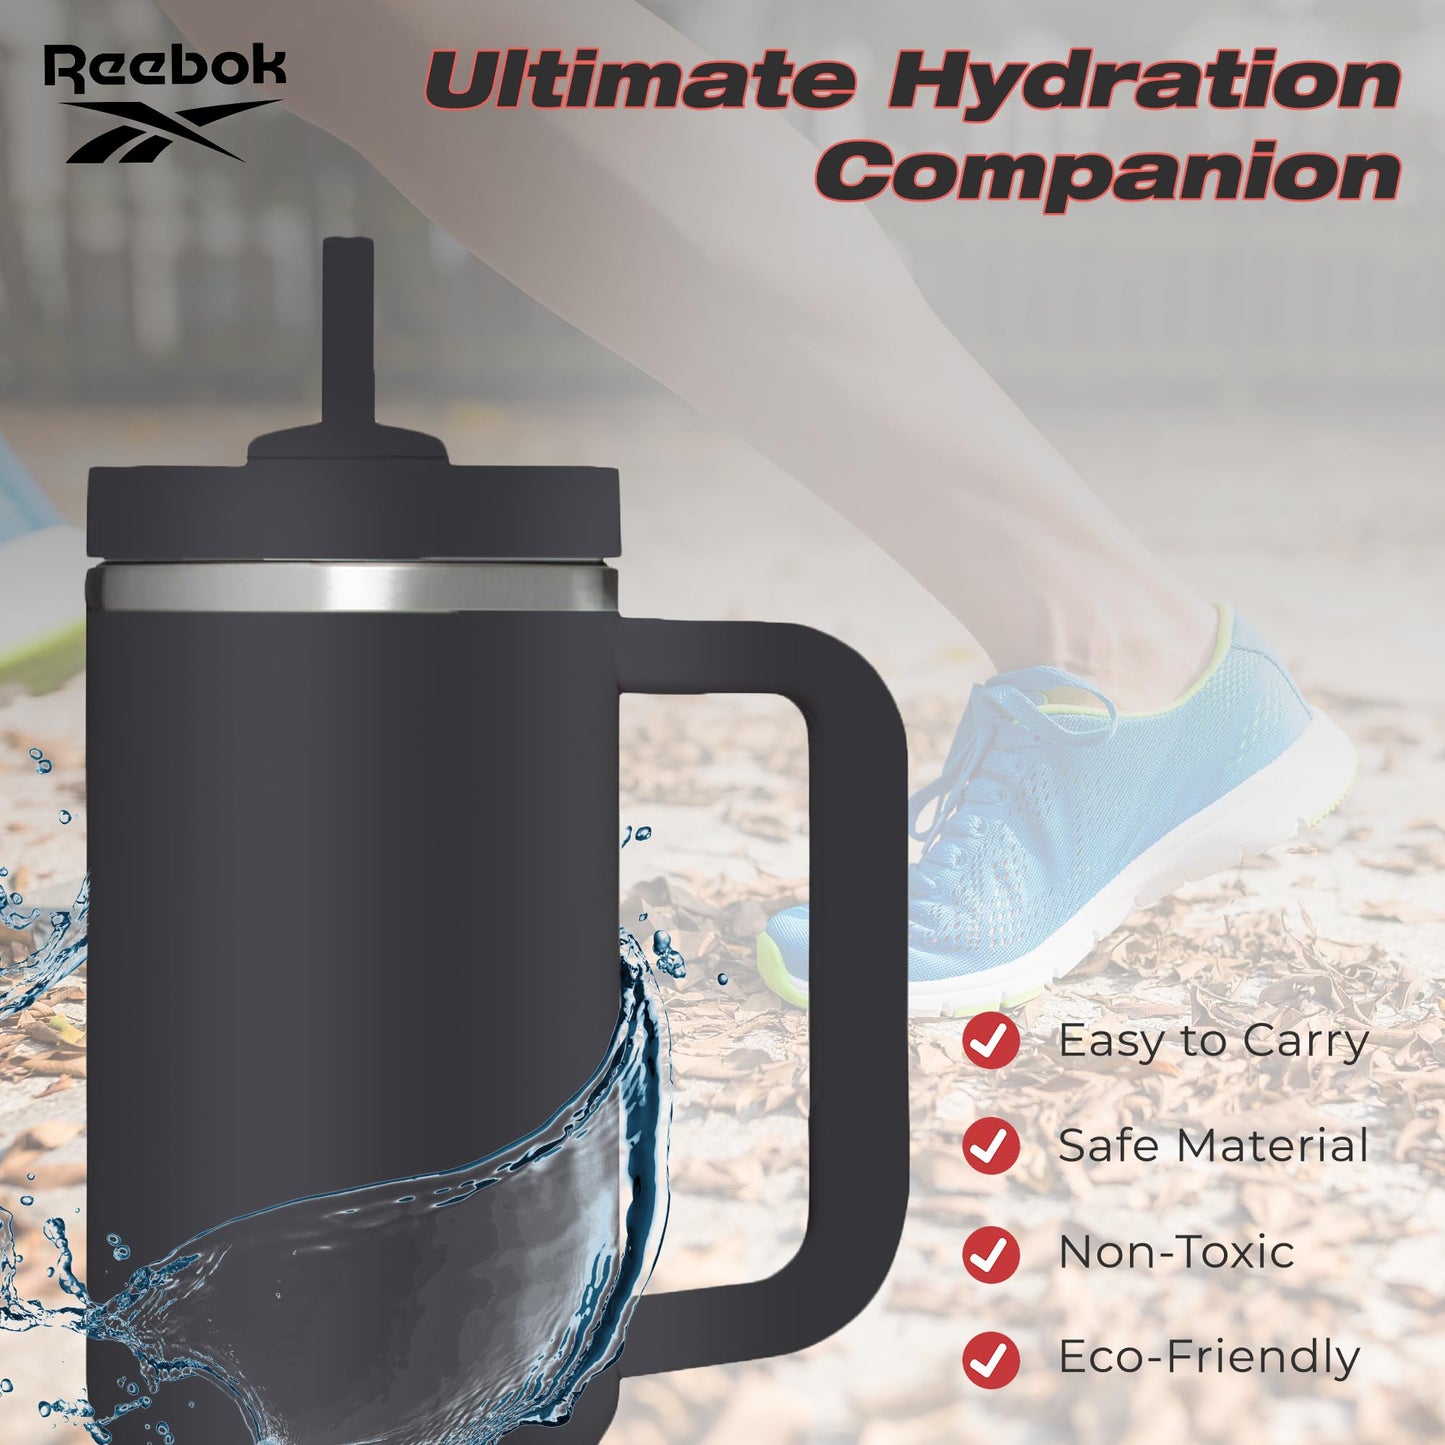 Reebok Lifestyle Stainless Steel Tumbler With Handle - 40 oz